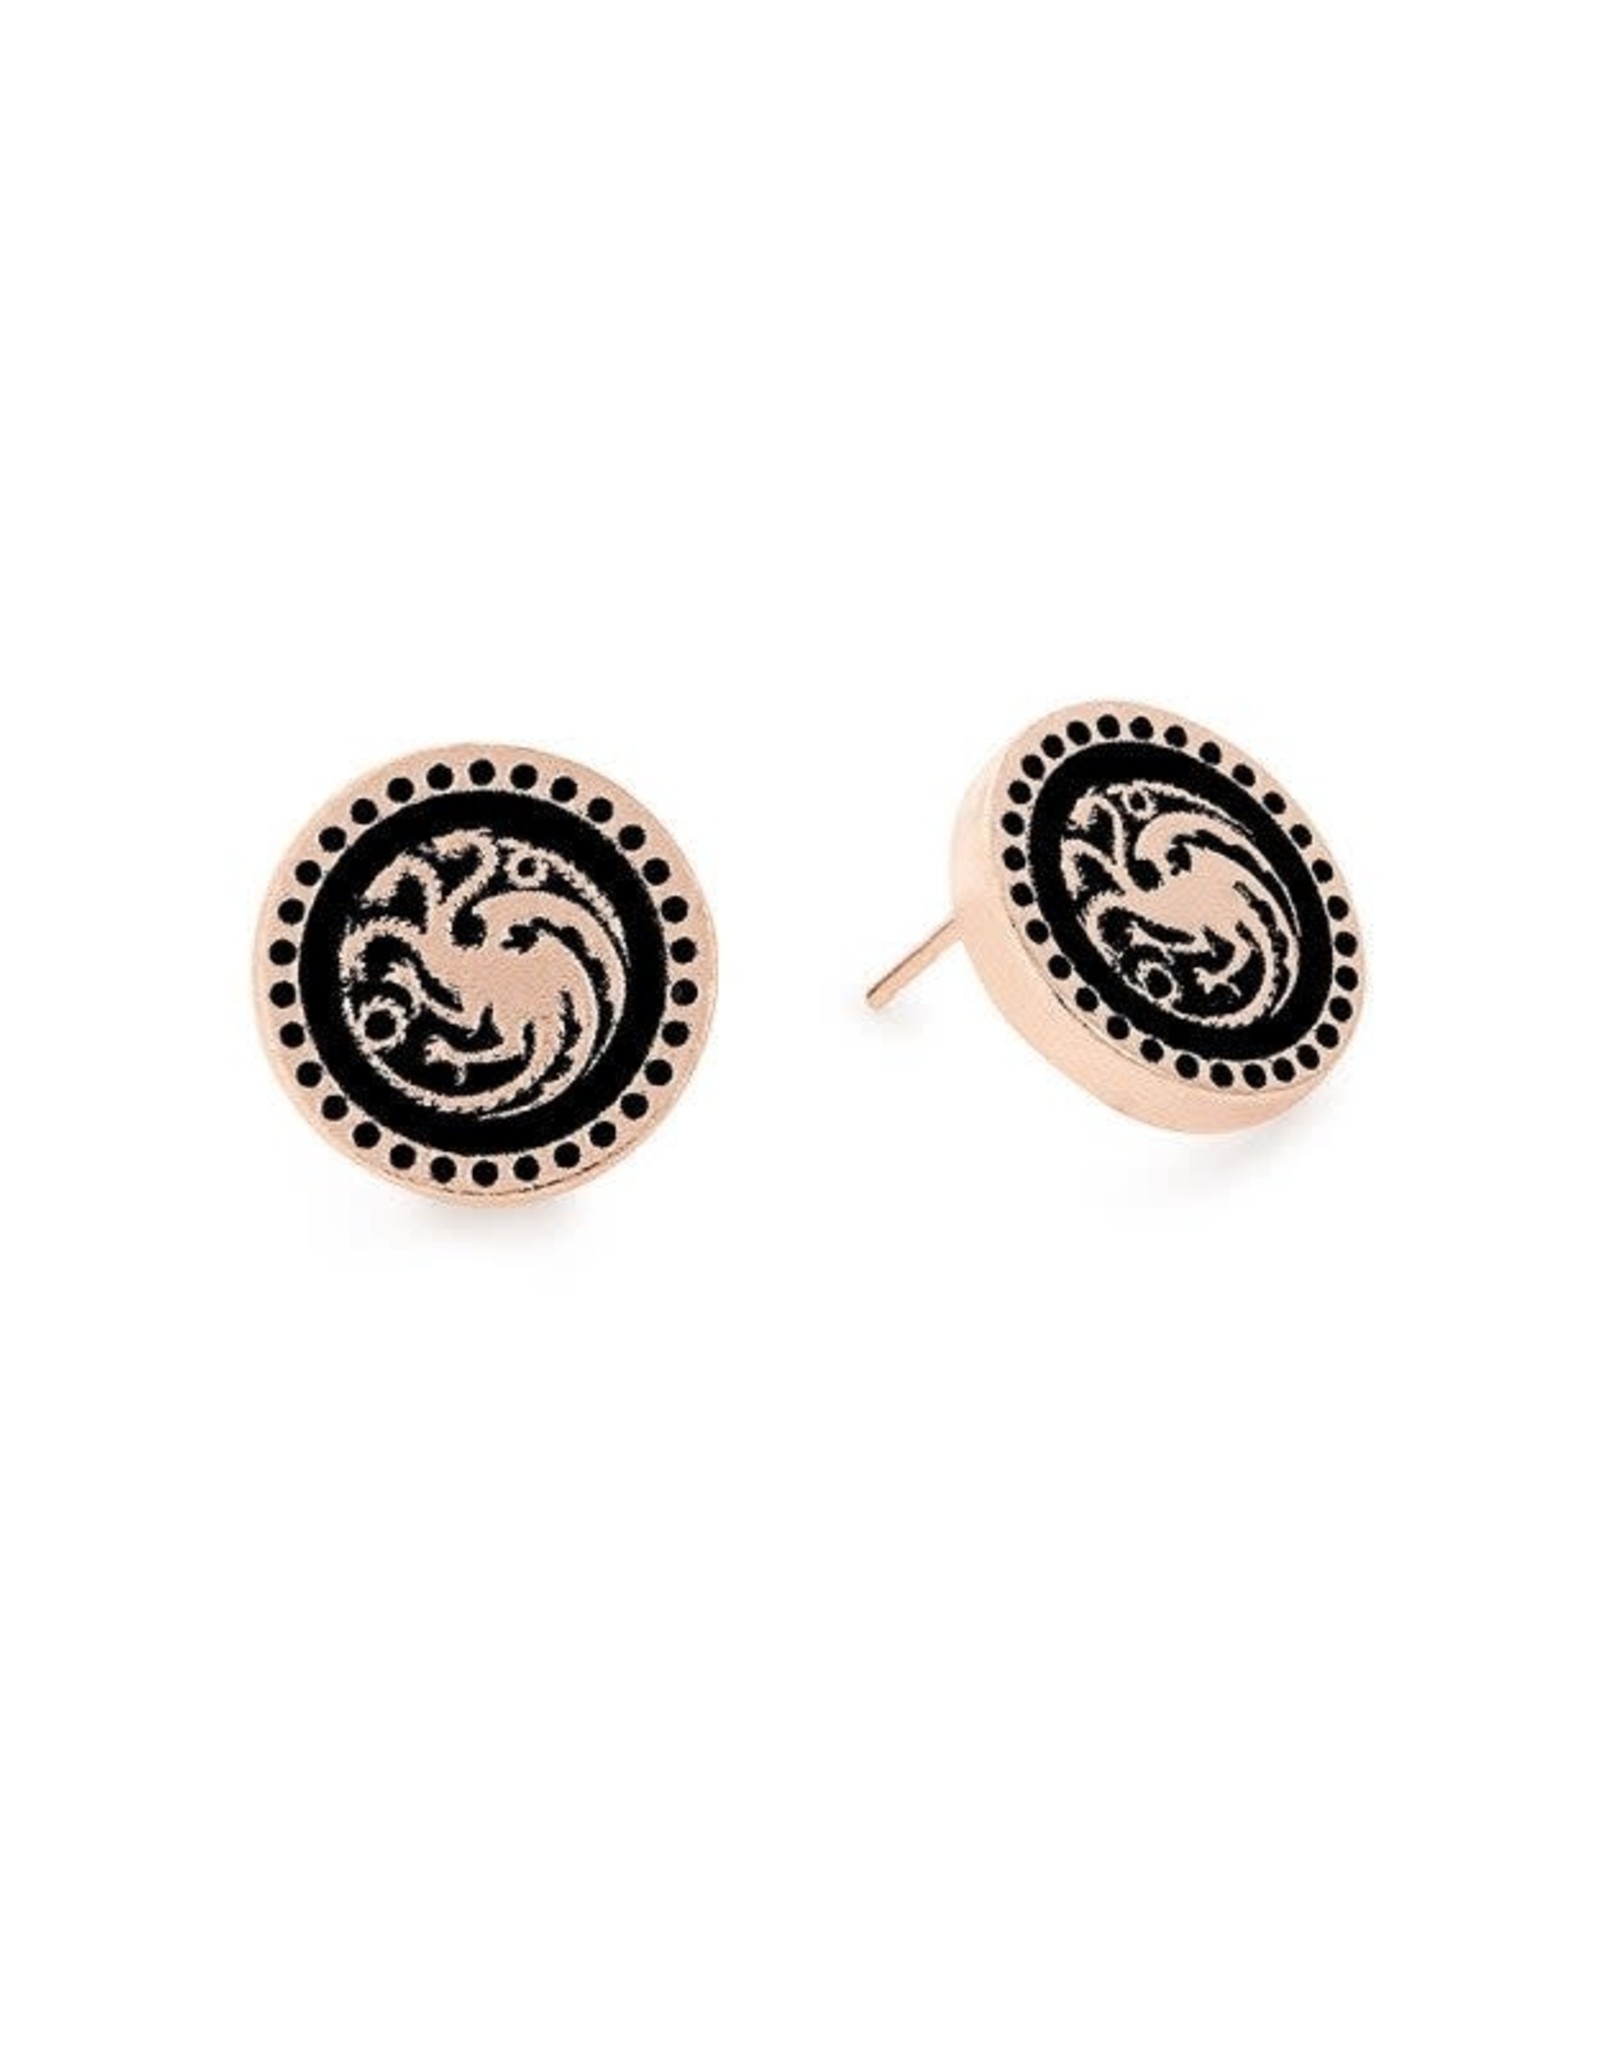 Alex and Ani Game of Thrones, Targaryen Post Earrings, 14KT Rose Gold Plated